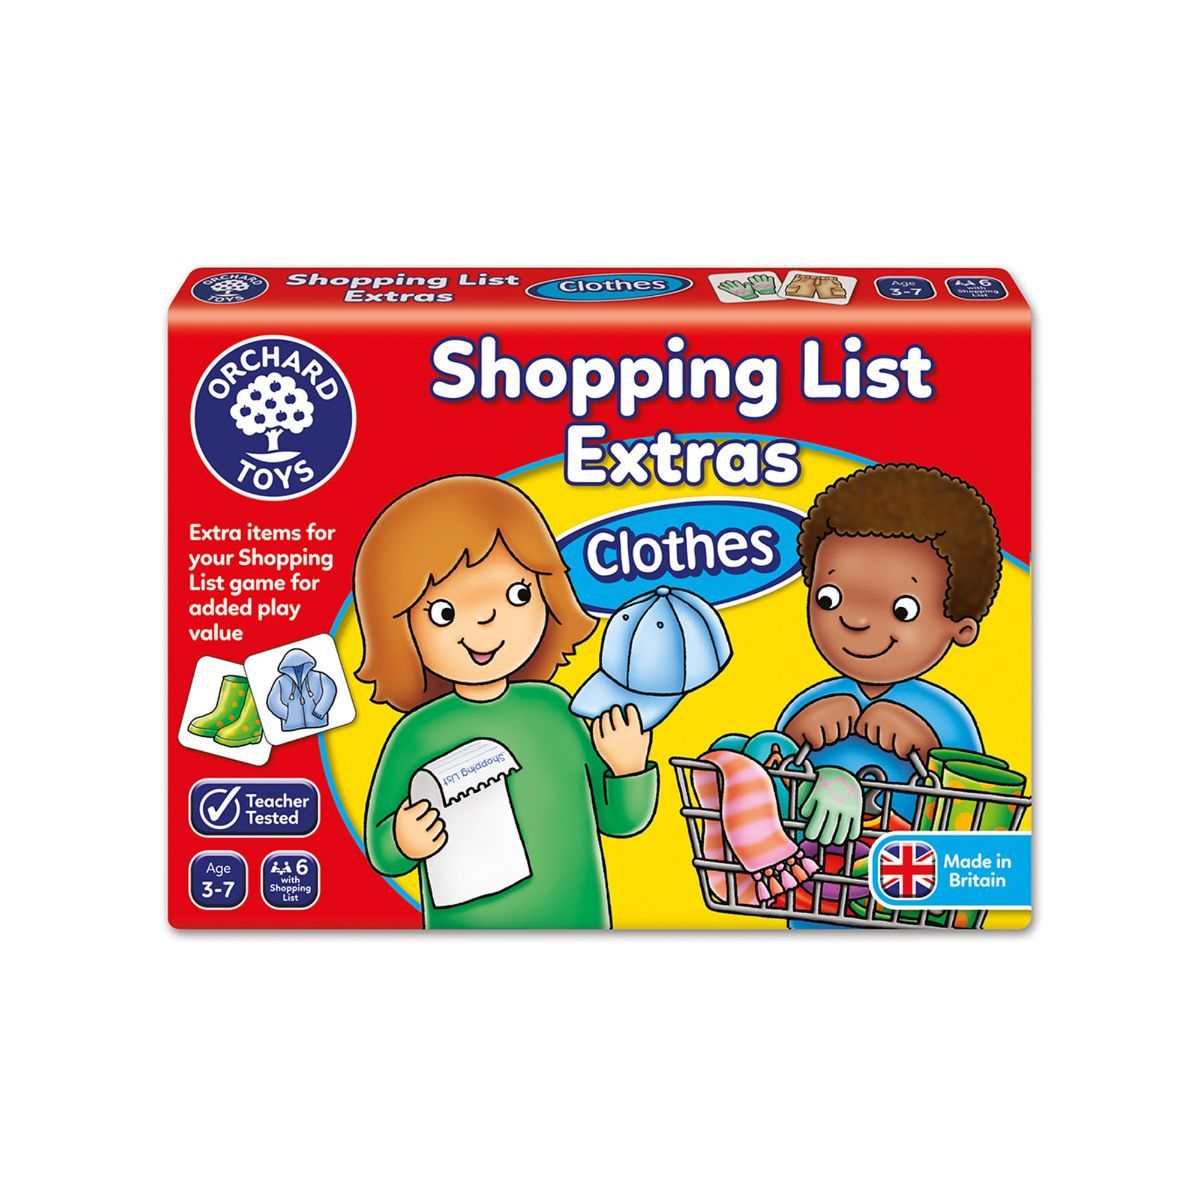 Orchard Toys Shopping List Extras - Clothes - Multi-Color (Free Size)